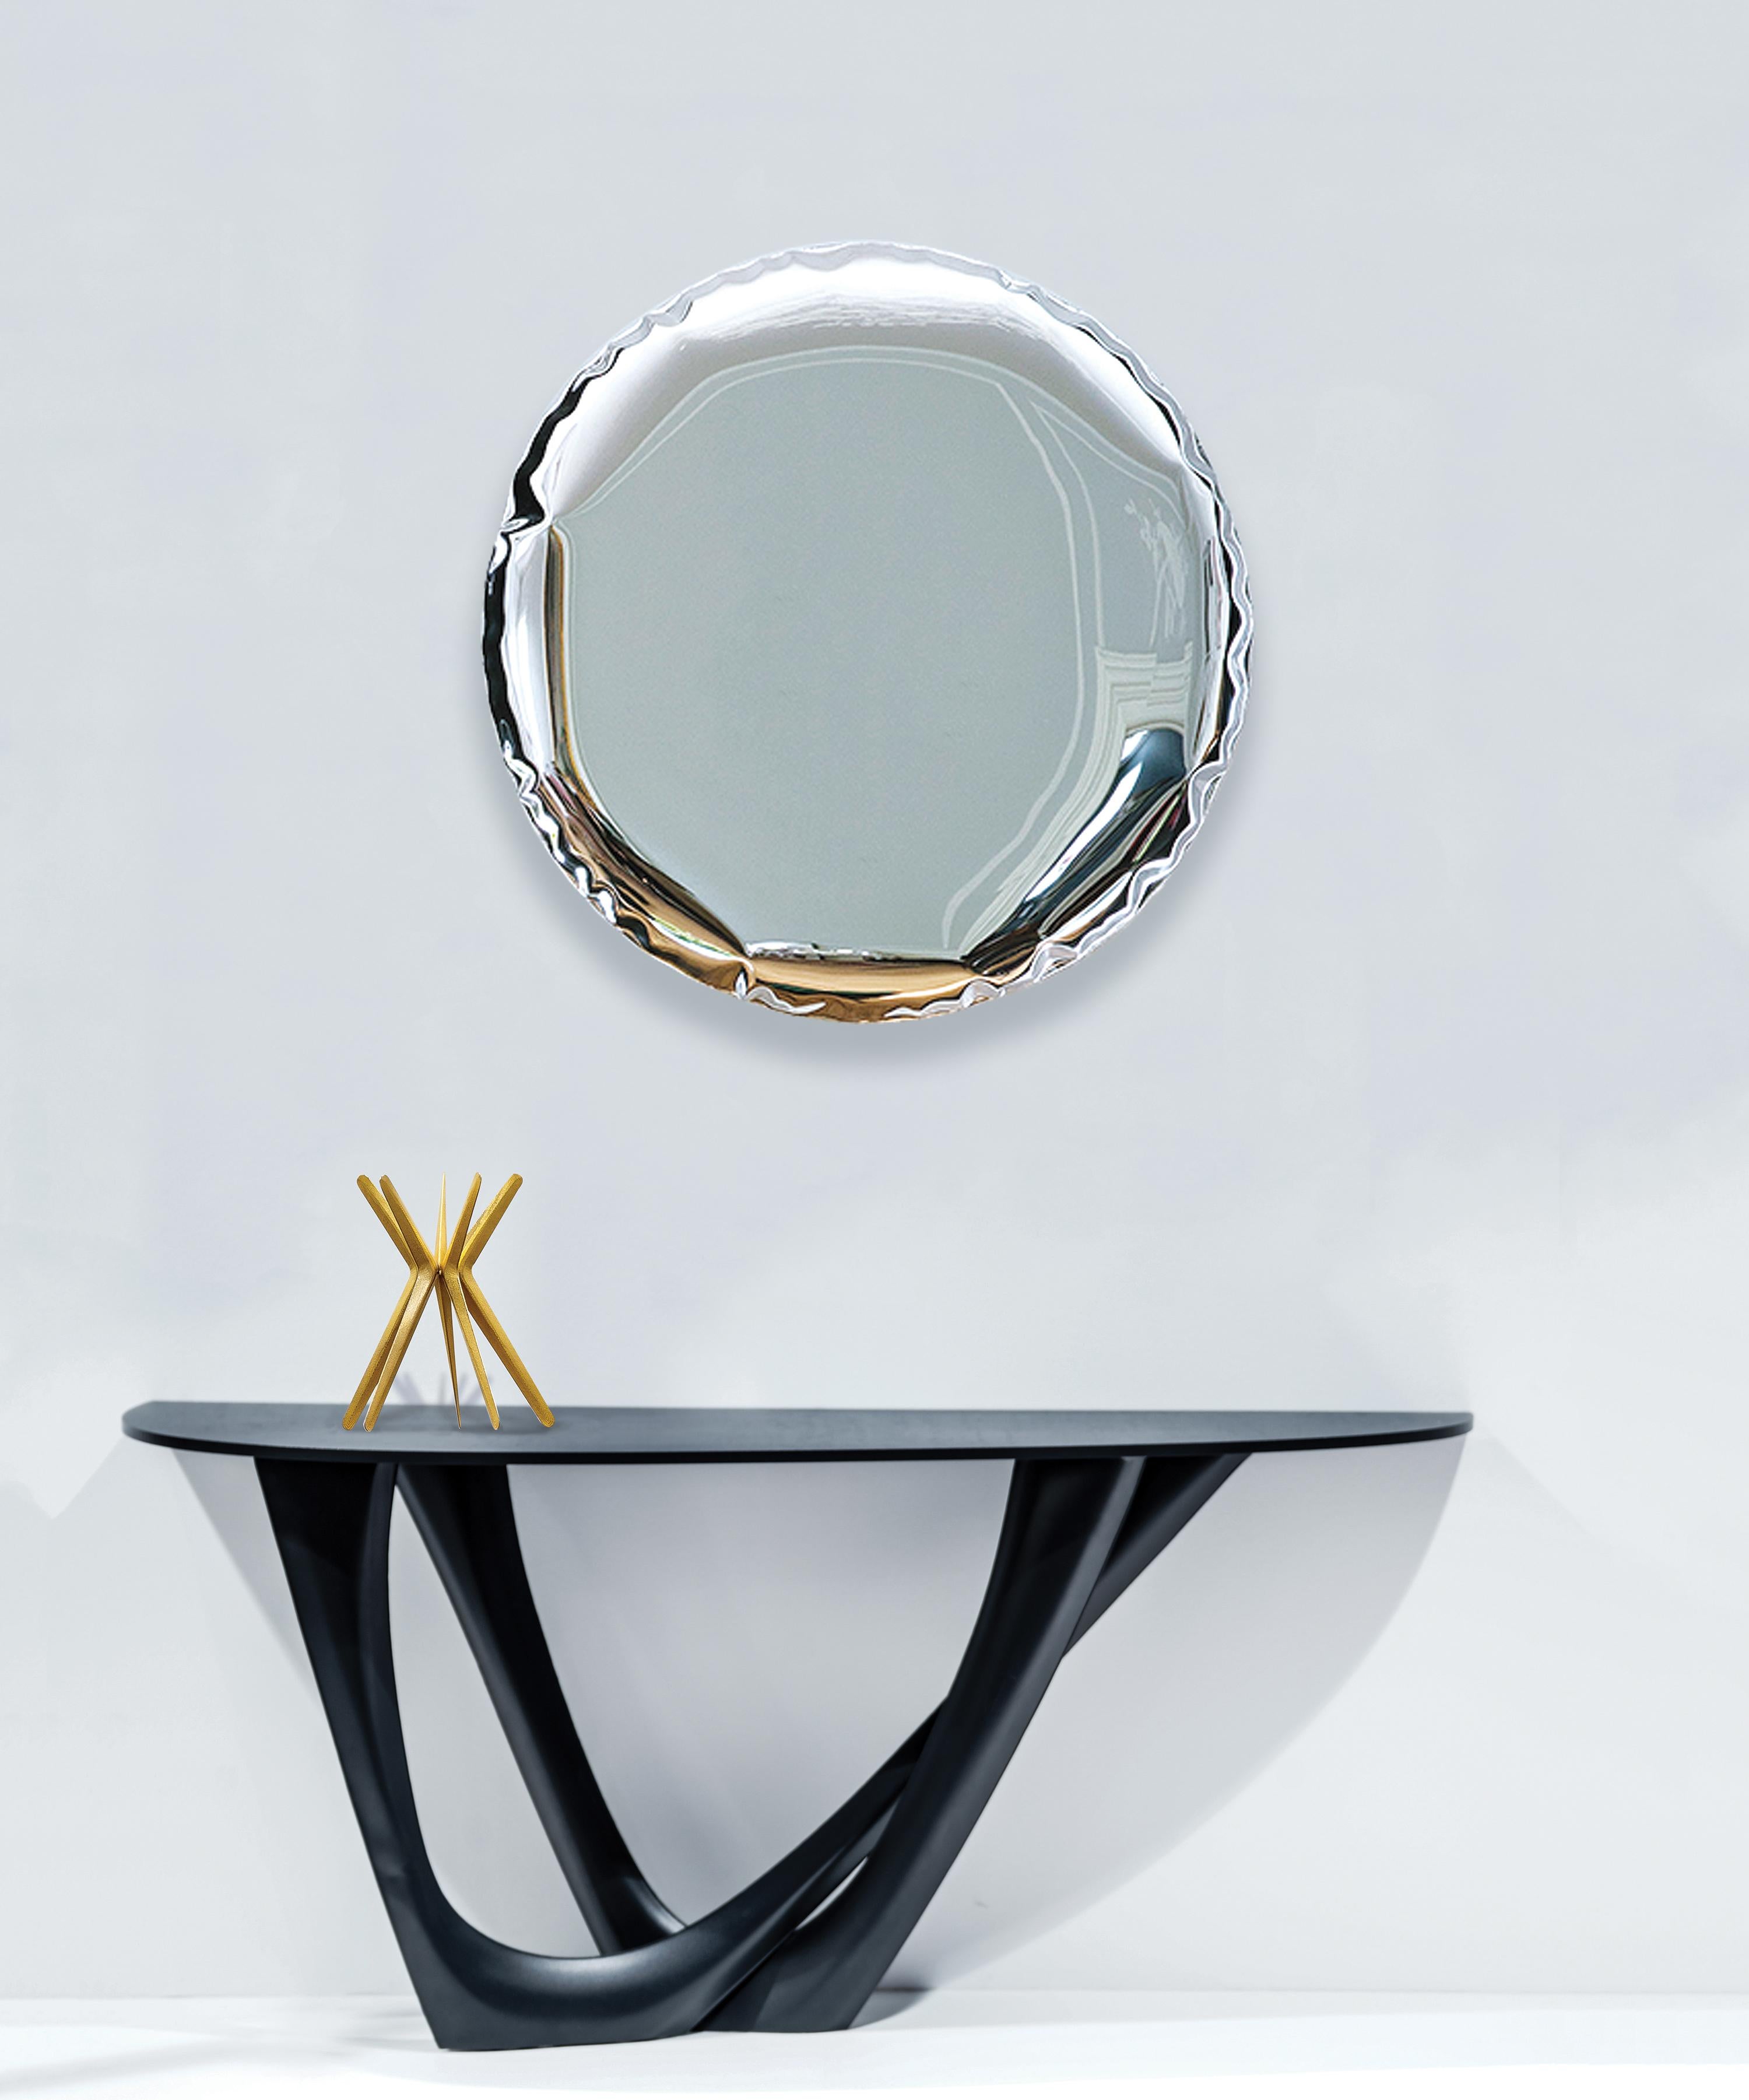 Helix Nebula Sapphire Topaz Oko 150 Sculptural Wall Mirror by Zieta
Dimensions: ø 150 x D 6 cm. 
Material: Stainless steel. 
Finish: Helix Nebula Sapphire Topaz transition. 

Available in different finishes. Also available in different sizes: ø75,